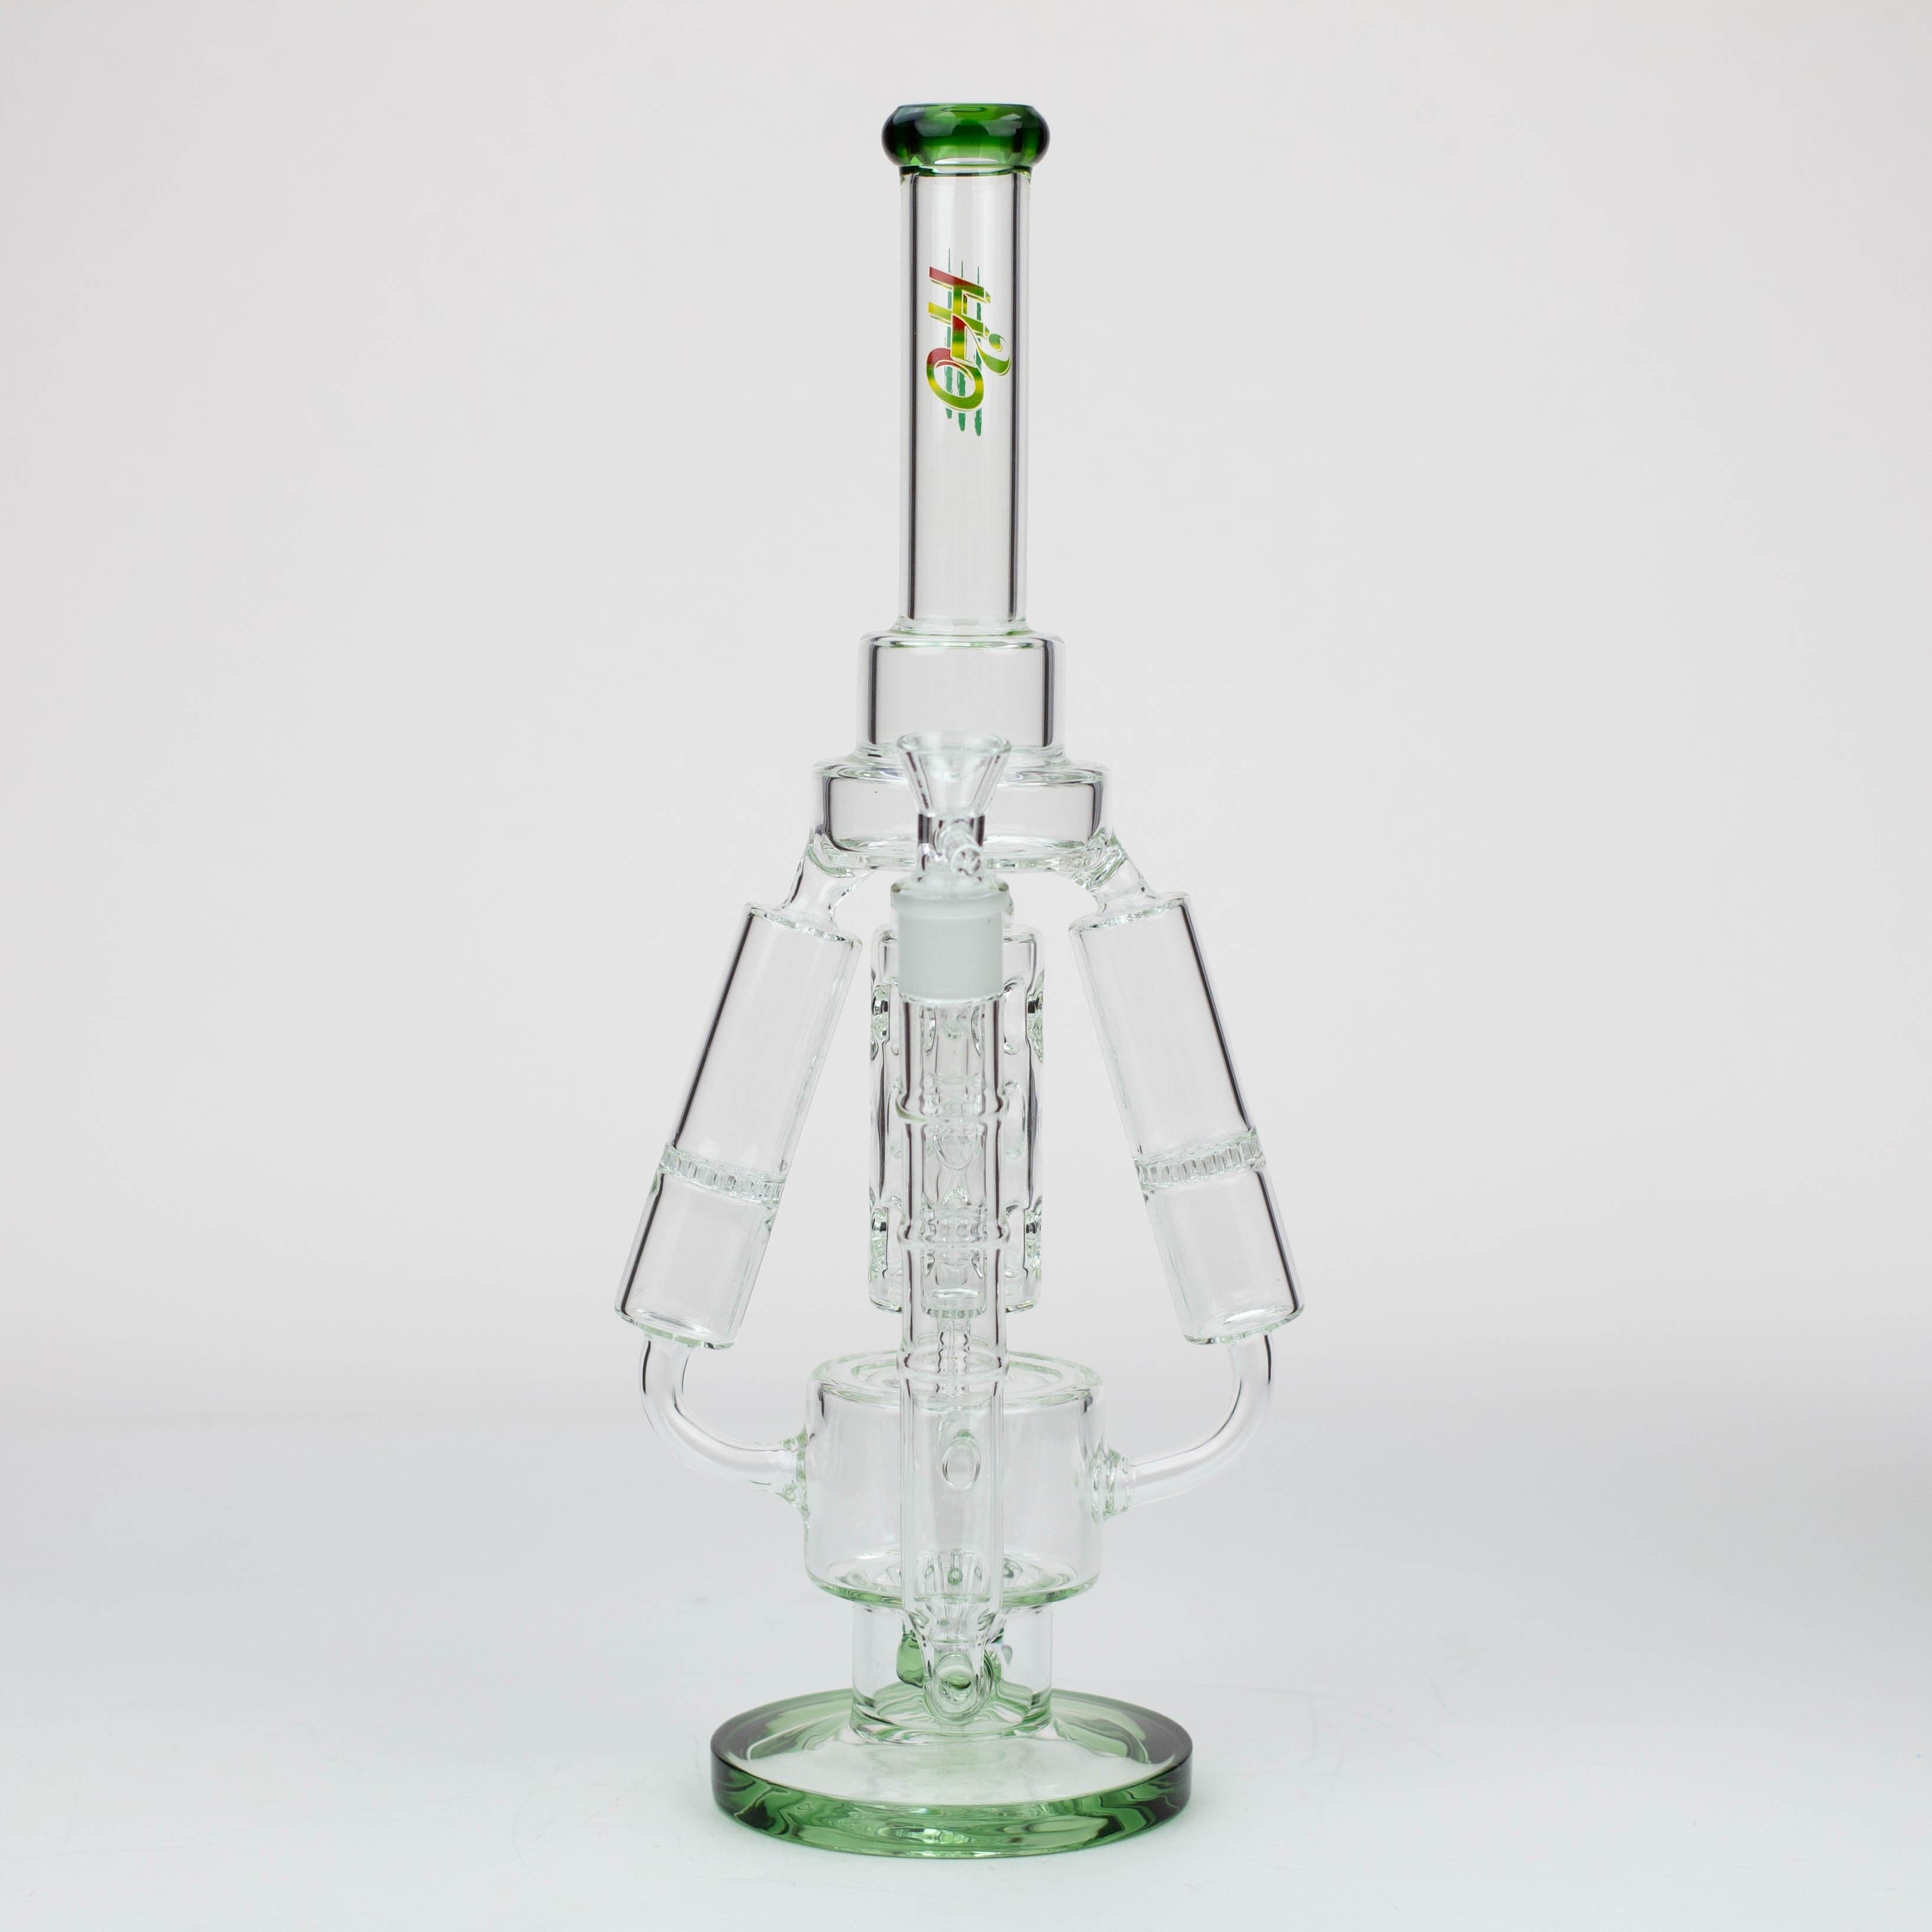 H2O Three Honeycomb silnders glass water recycle pipes 17"_8